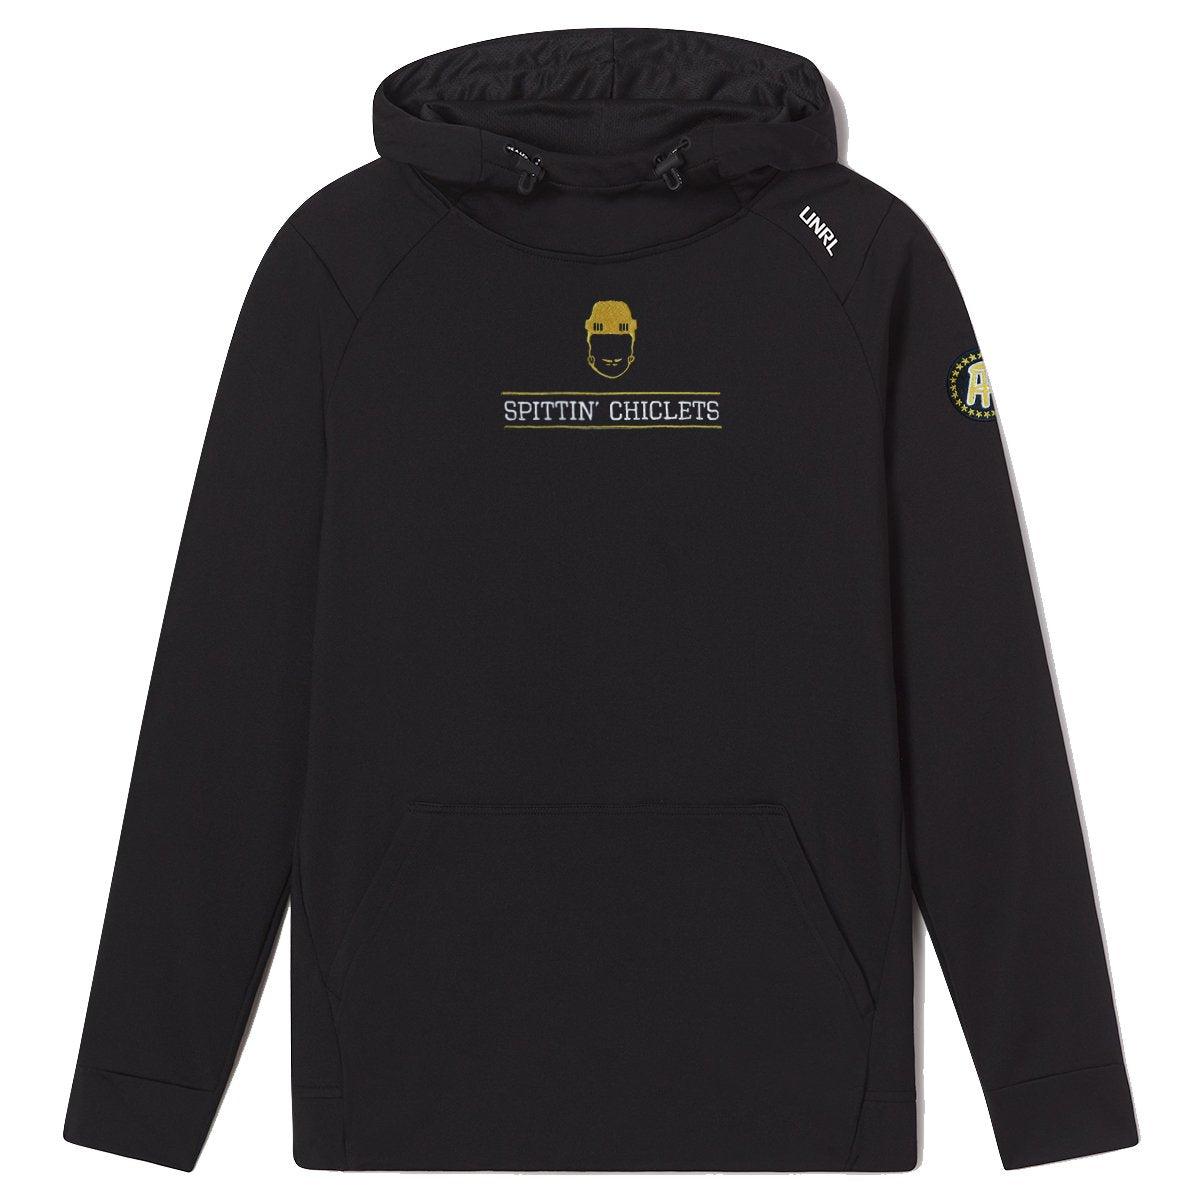 UNRL x Spittin Chiclets Crossover Hoodie II